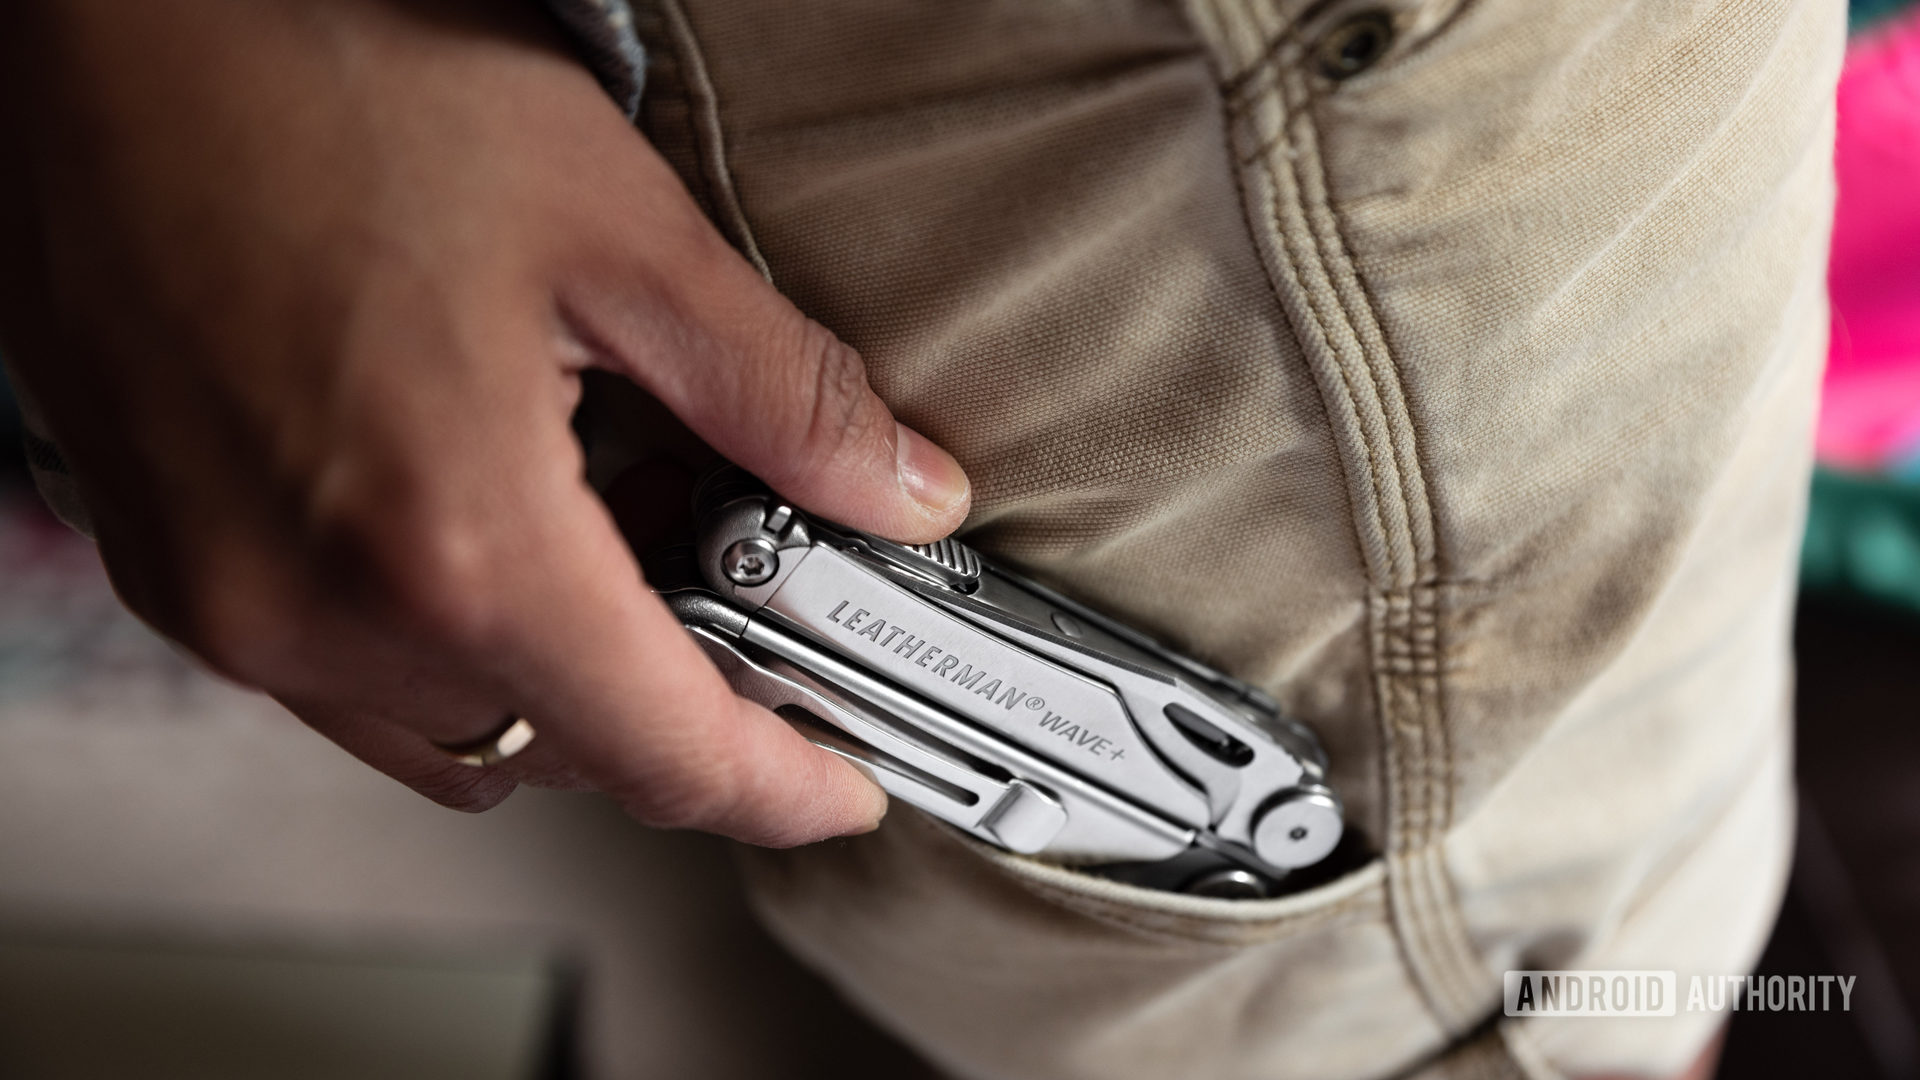 A picture of a Leatherman Wave Plus multitool being removed from a shorts pocket.